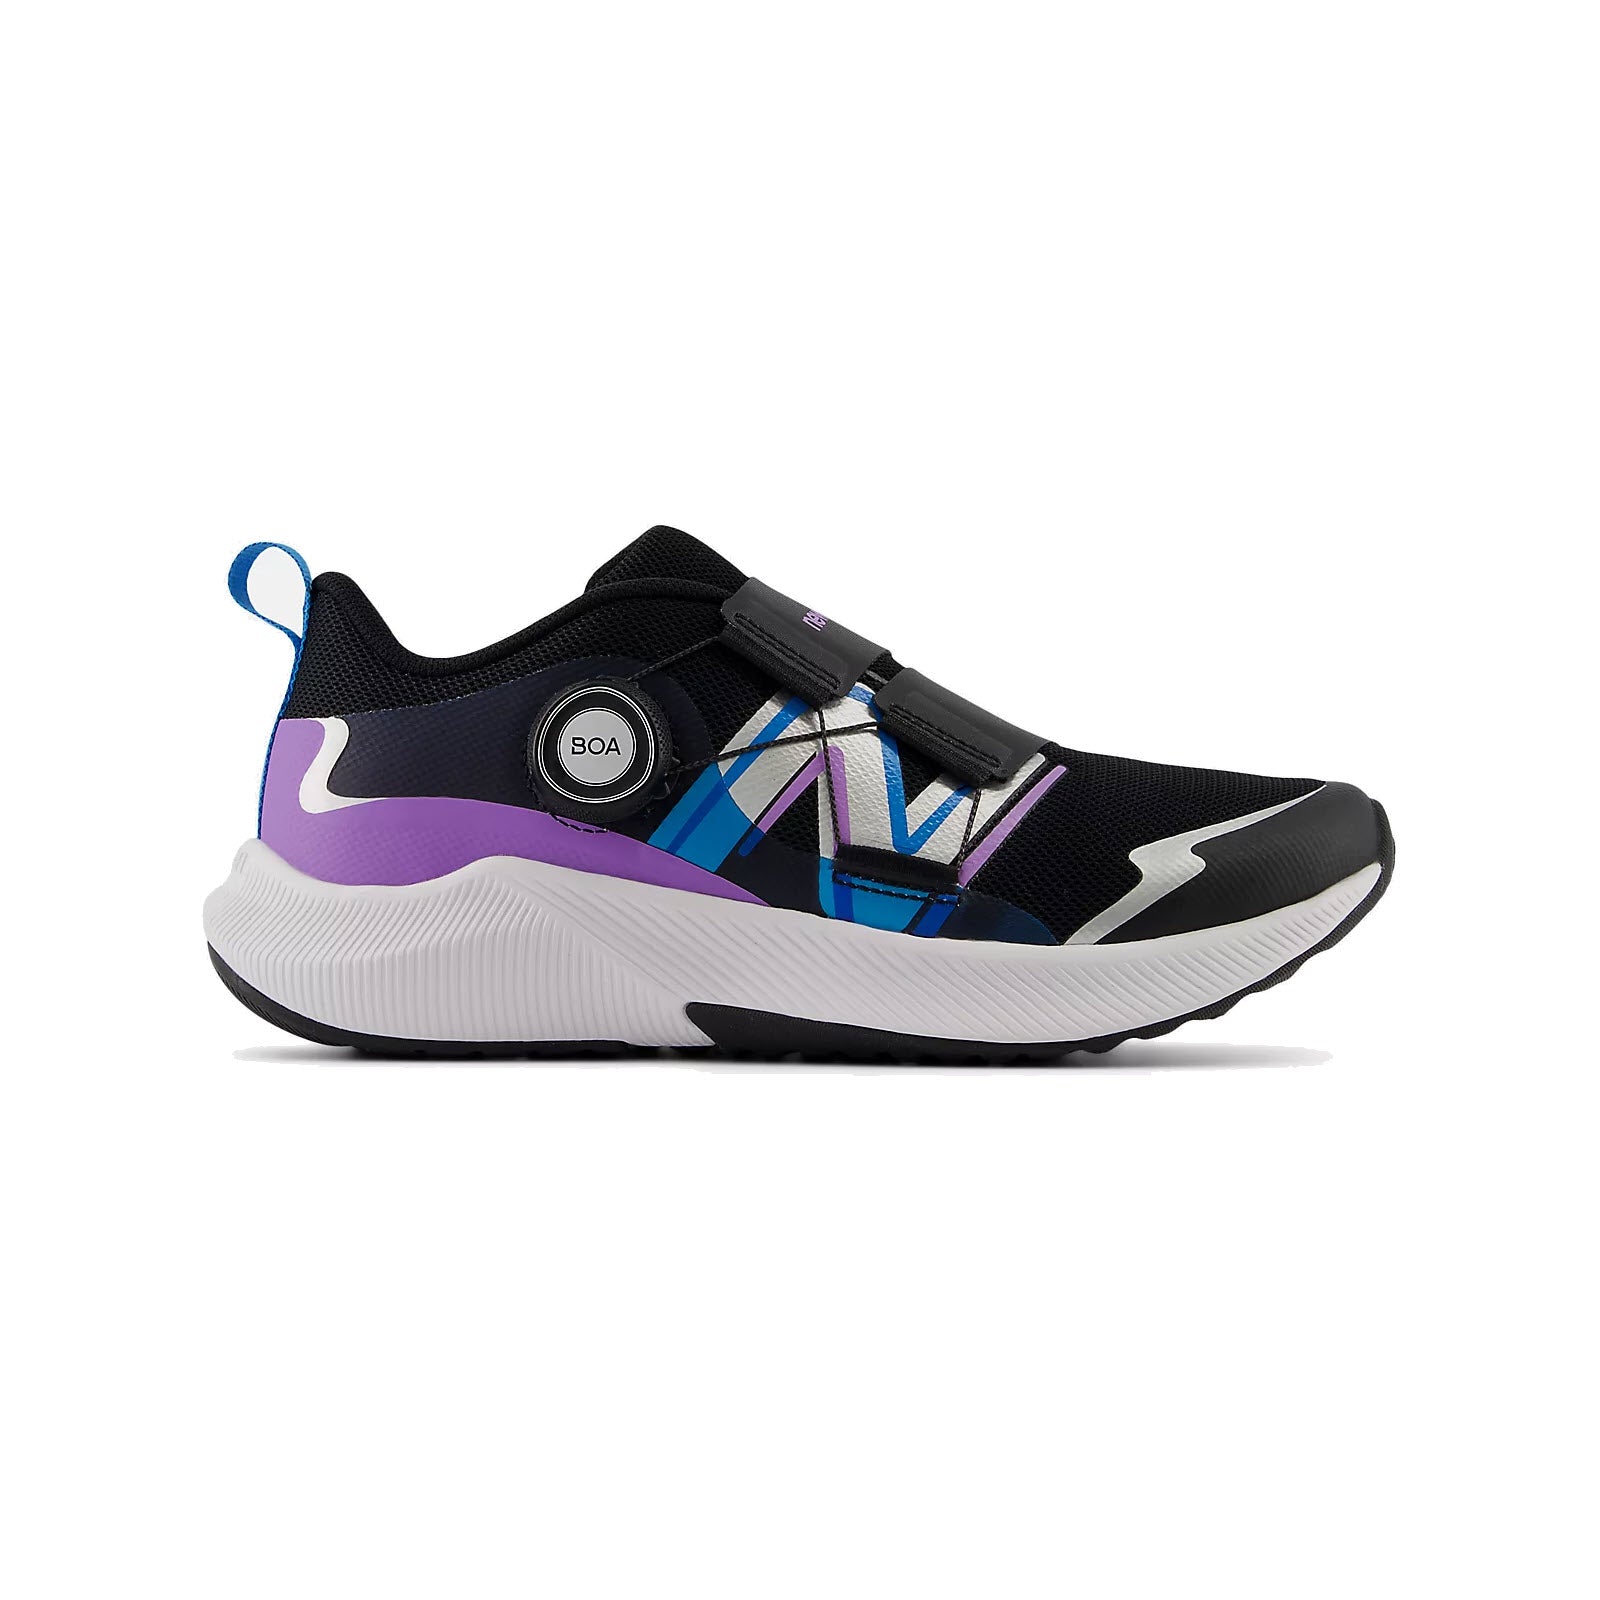 A modern black kids' sneaker with purple and blue accents, featuring a New Balance REVEAL V4 BOA BLACK/PURPLE - KIDS and a white sole.